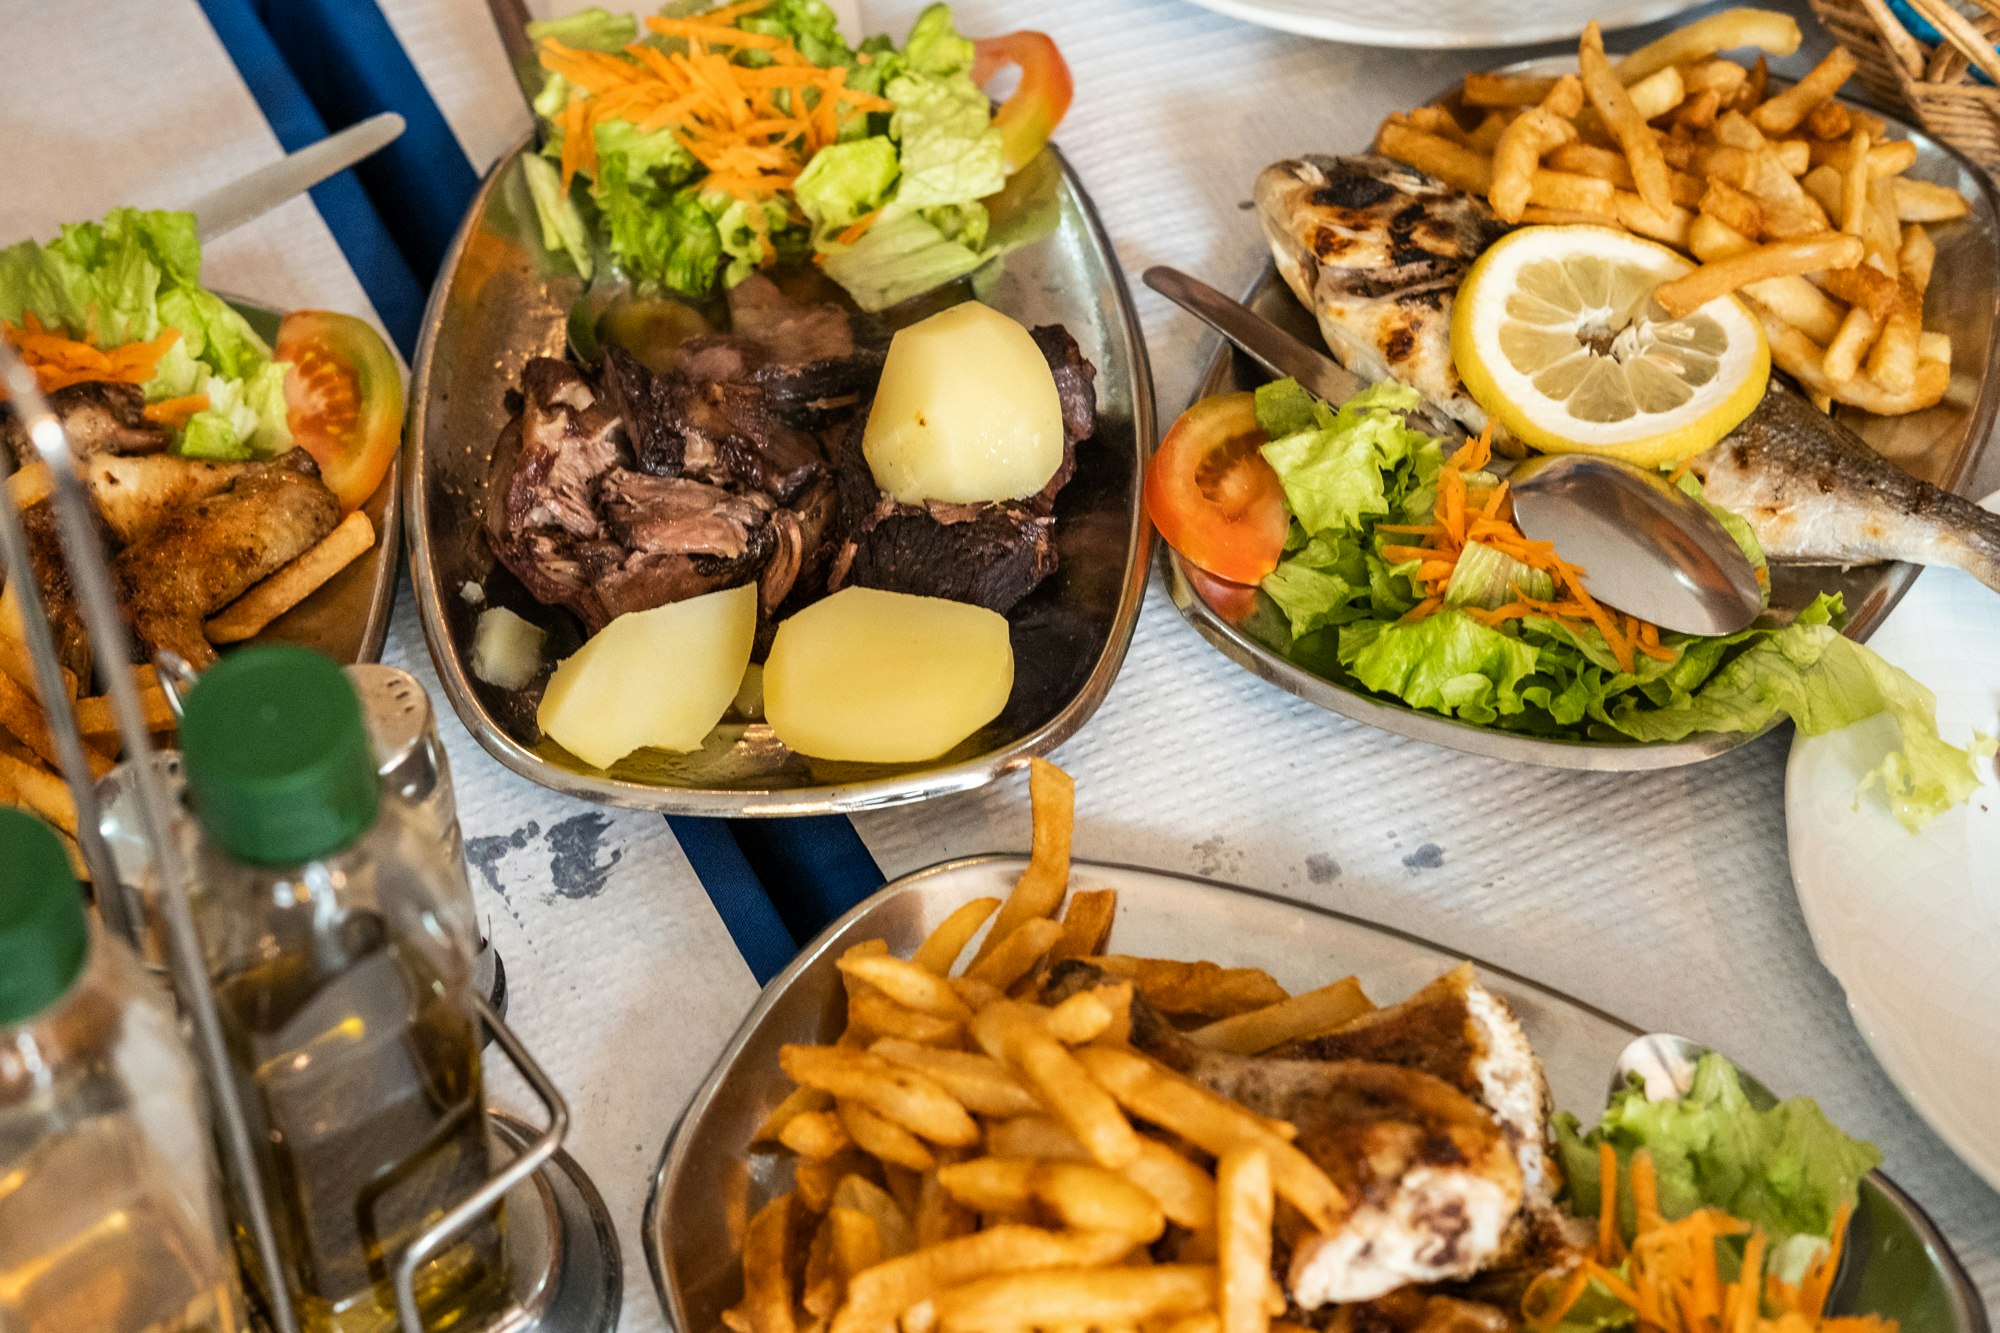 A table is laid with metal dishes containing a variety foods, from barbecued meat, to chips and salad.